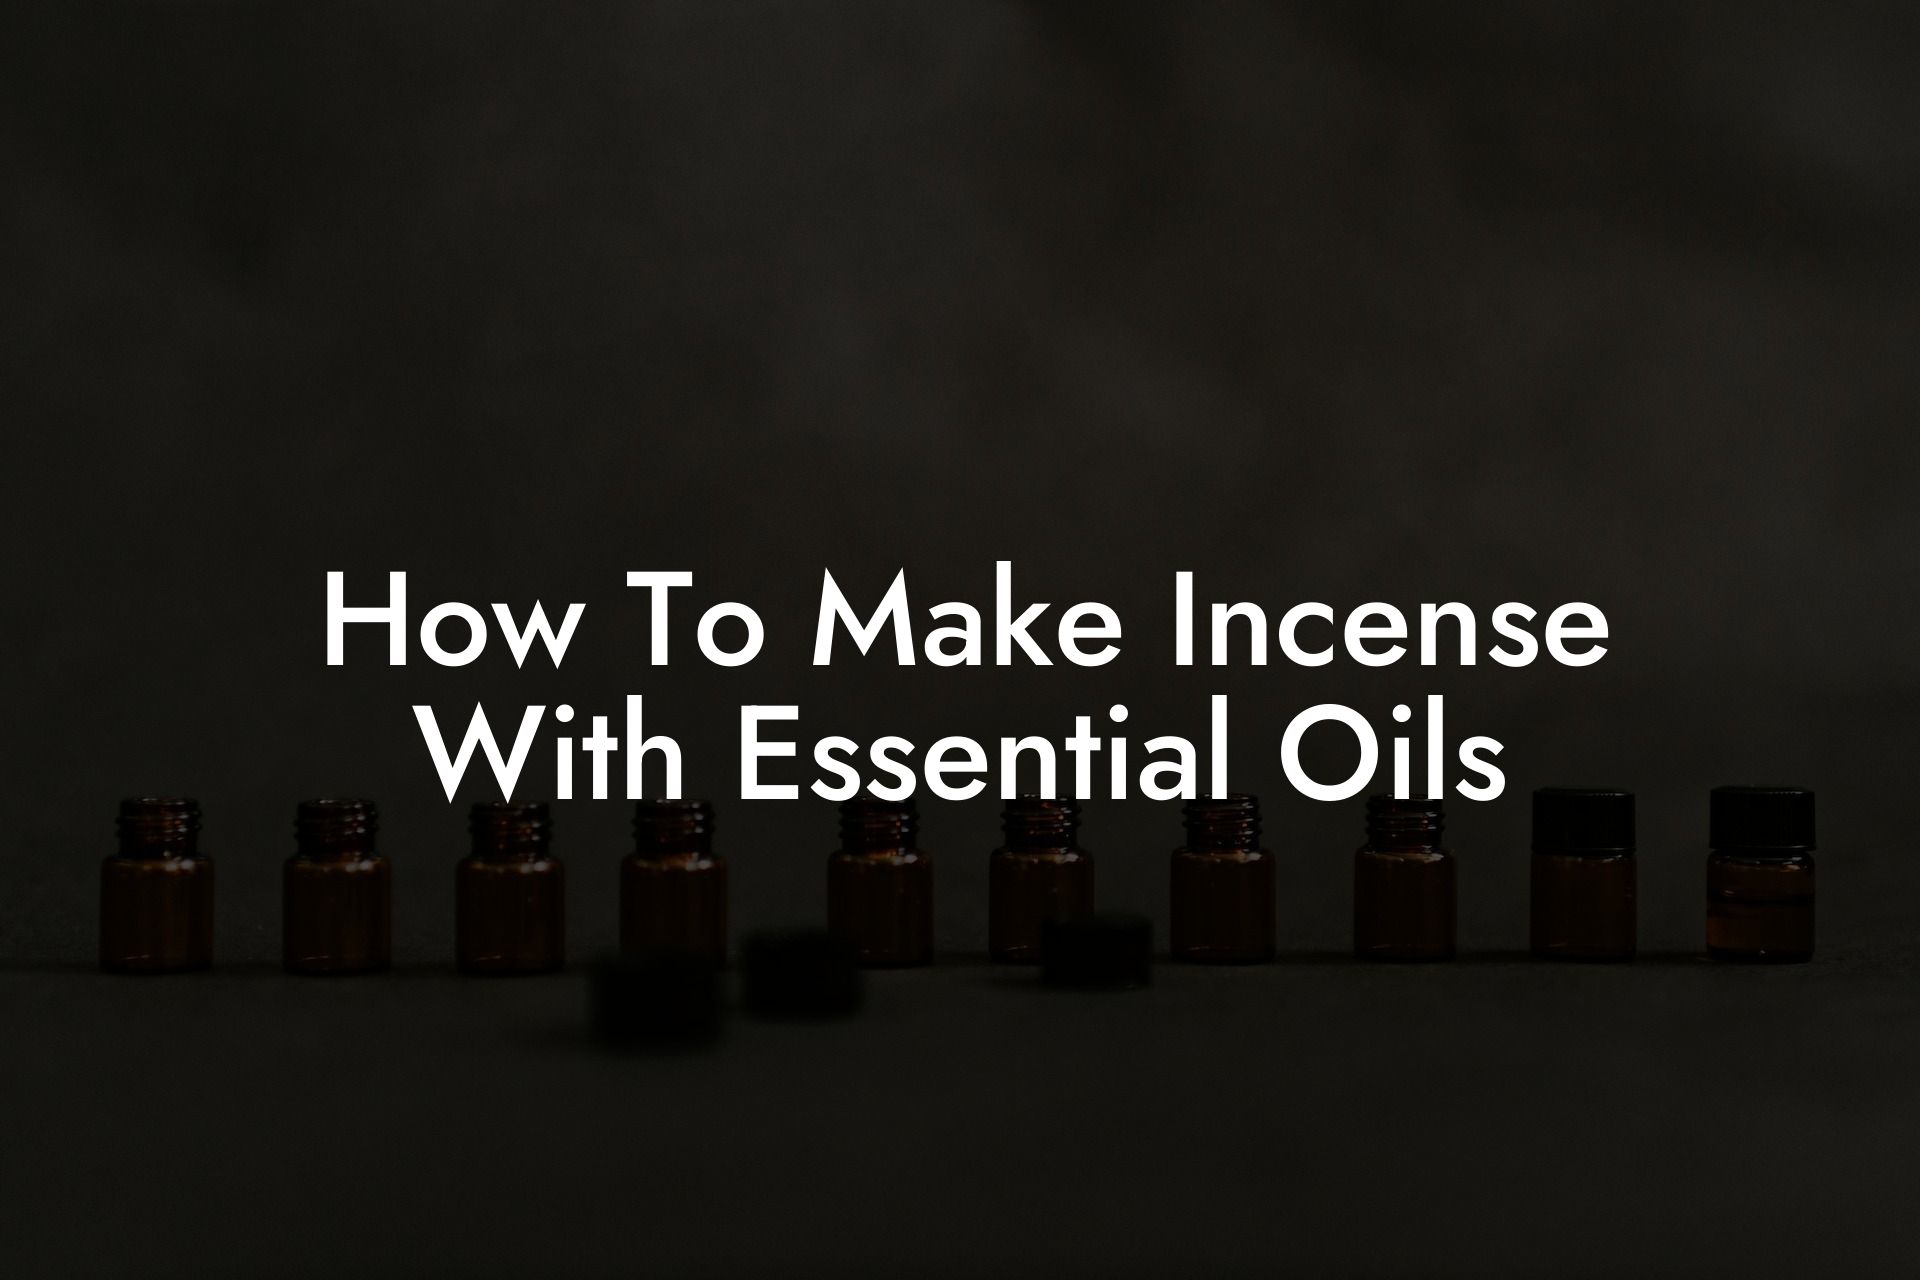 How To Make Incense With Essential Oils